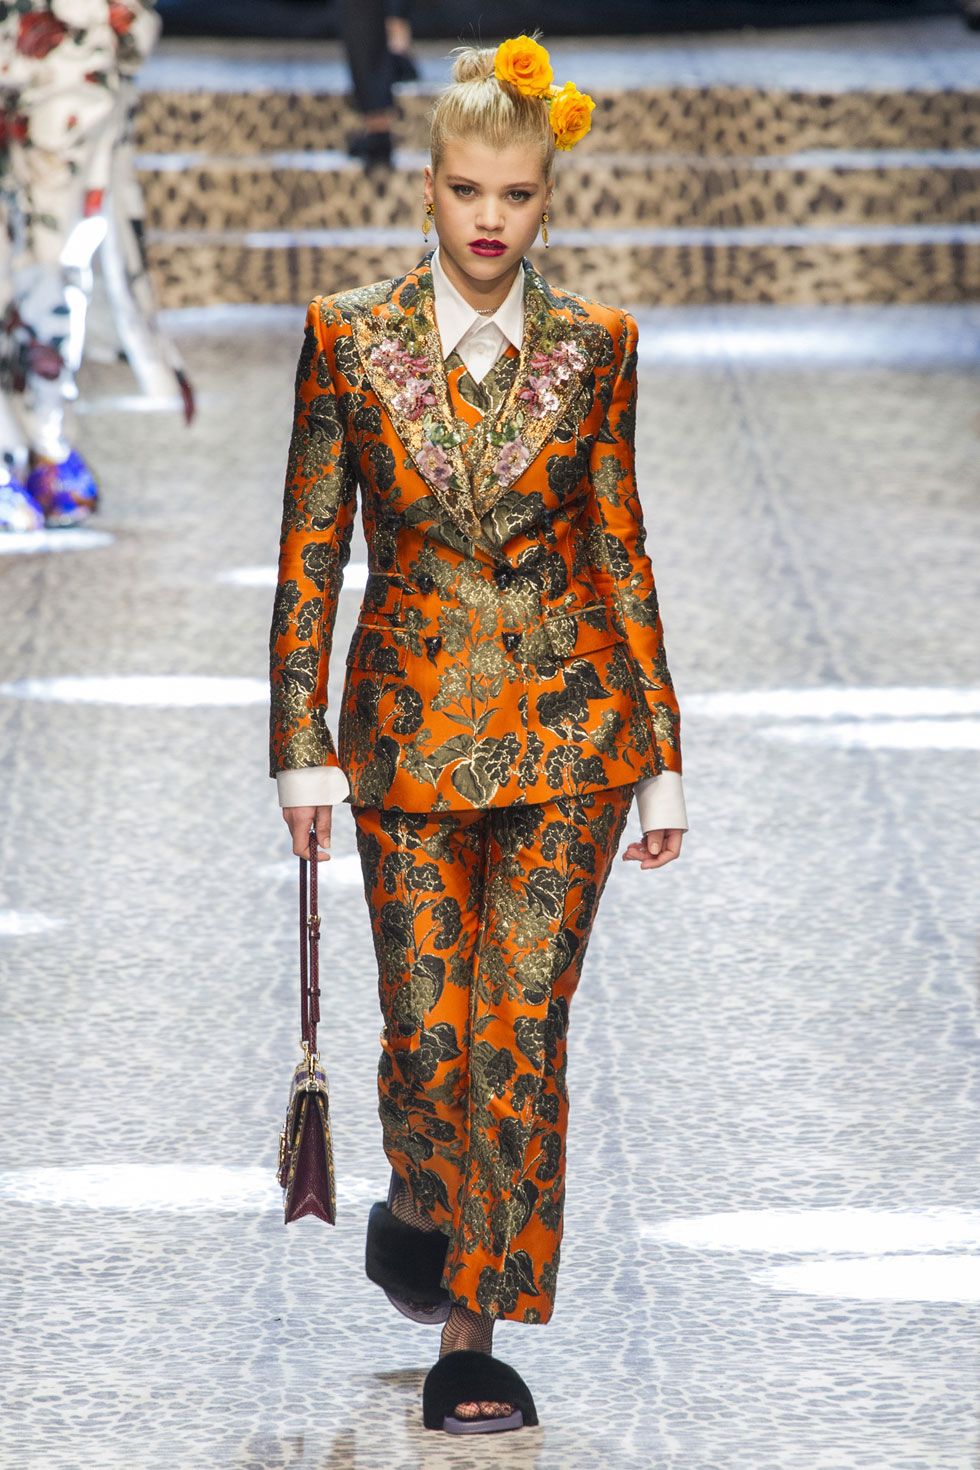 149 Looks From Dolce & Gabbana Fall Show - Dolce & Runway at Milan Fashion Week